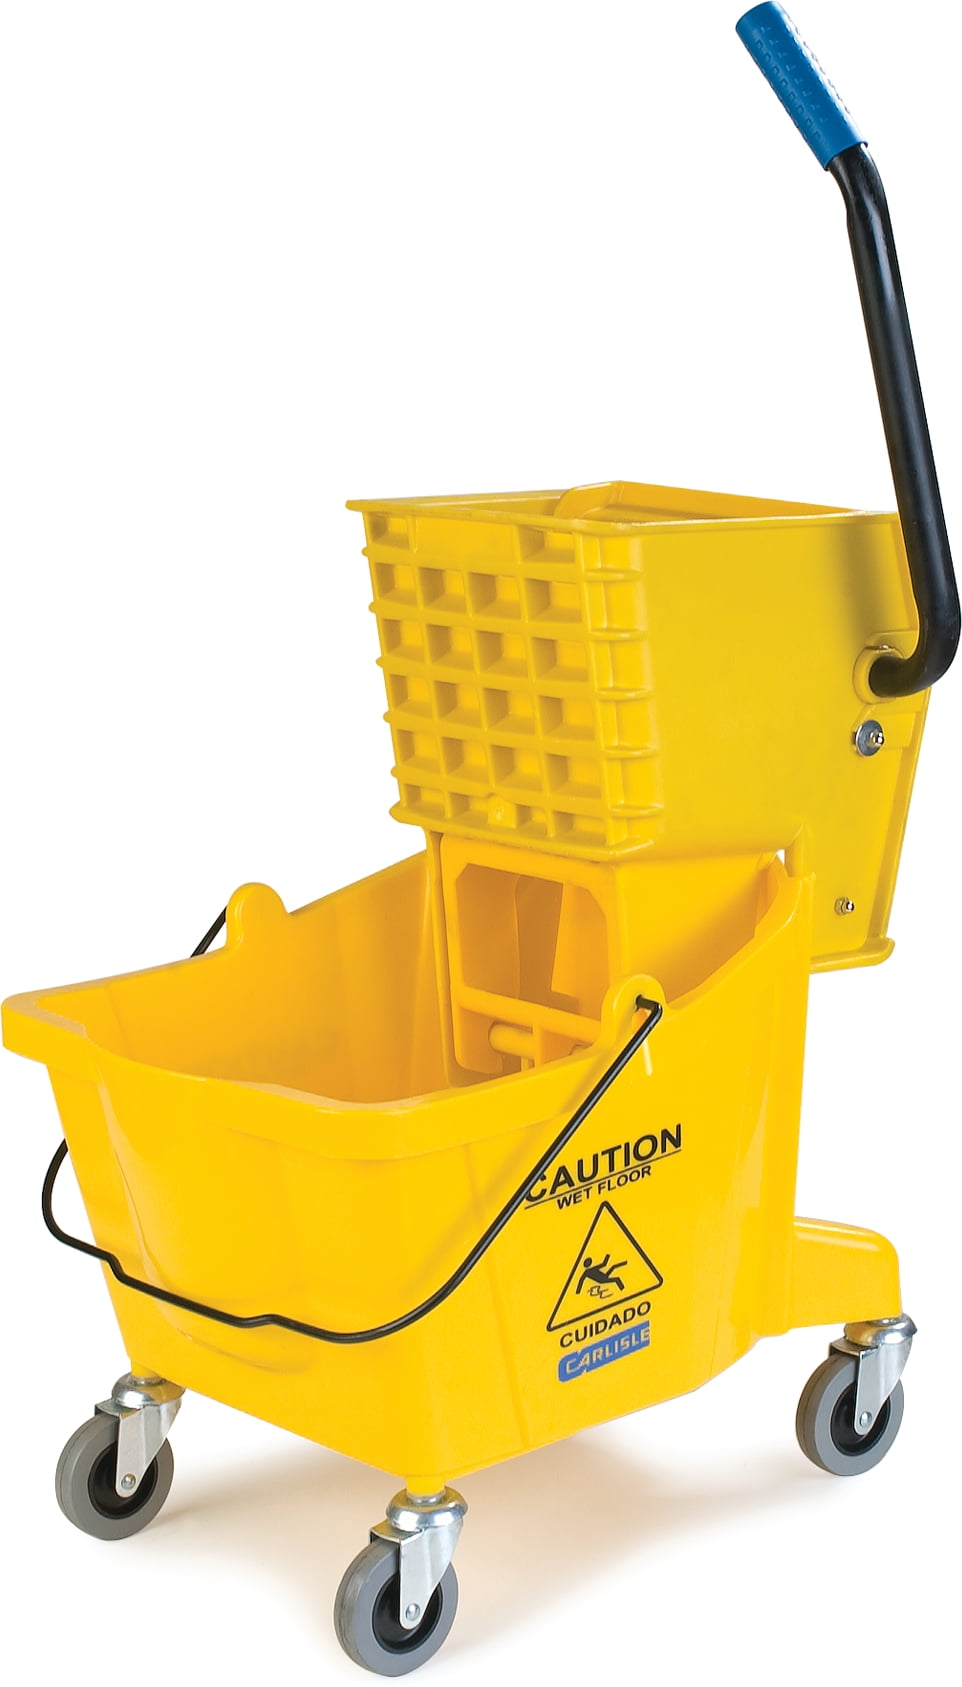 Small Mop Bucket with Wringer 5.2 Gallon AF08068 